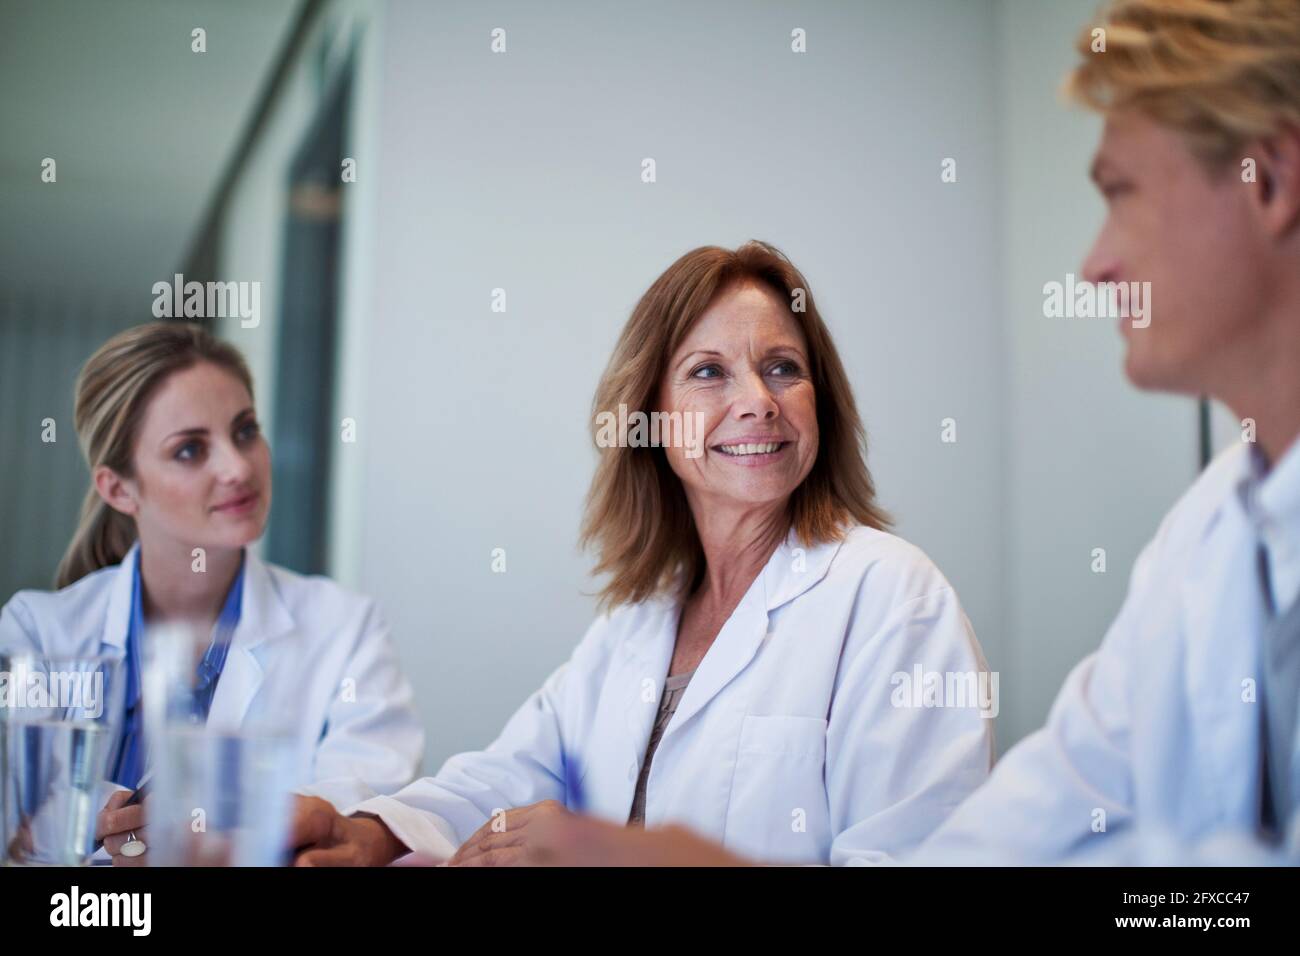 Female doctors smiling at male colleague in hospital Stock Photo